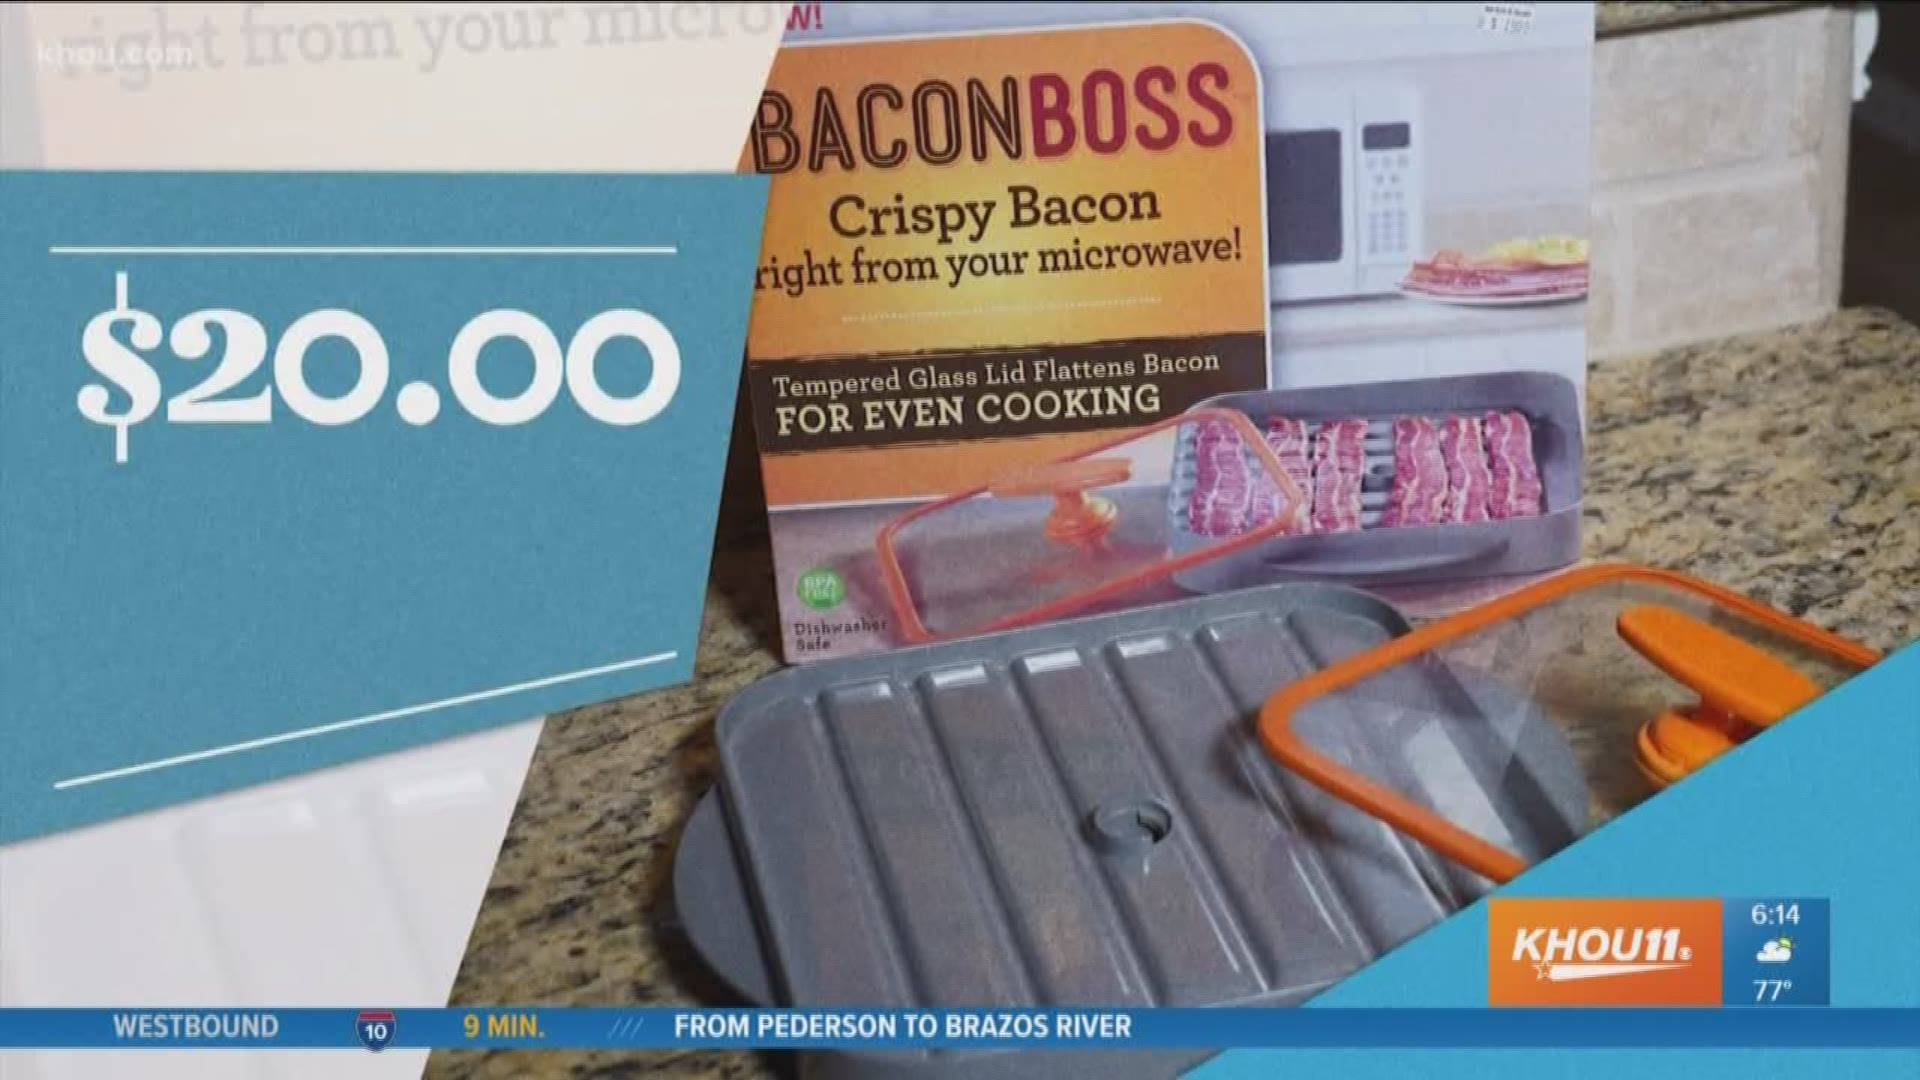 Frying it in a pan is still the No. 1 way to prepare bacon, but a new product might tempt you to cook it up differently.